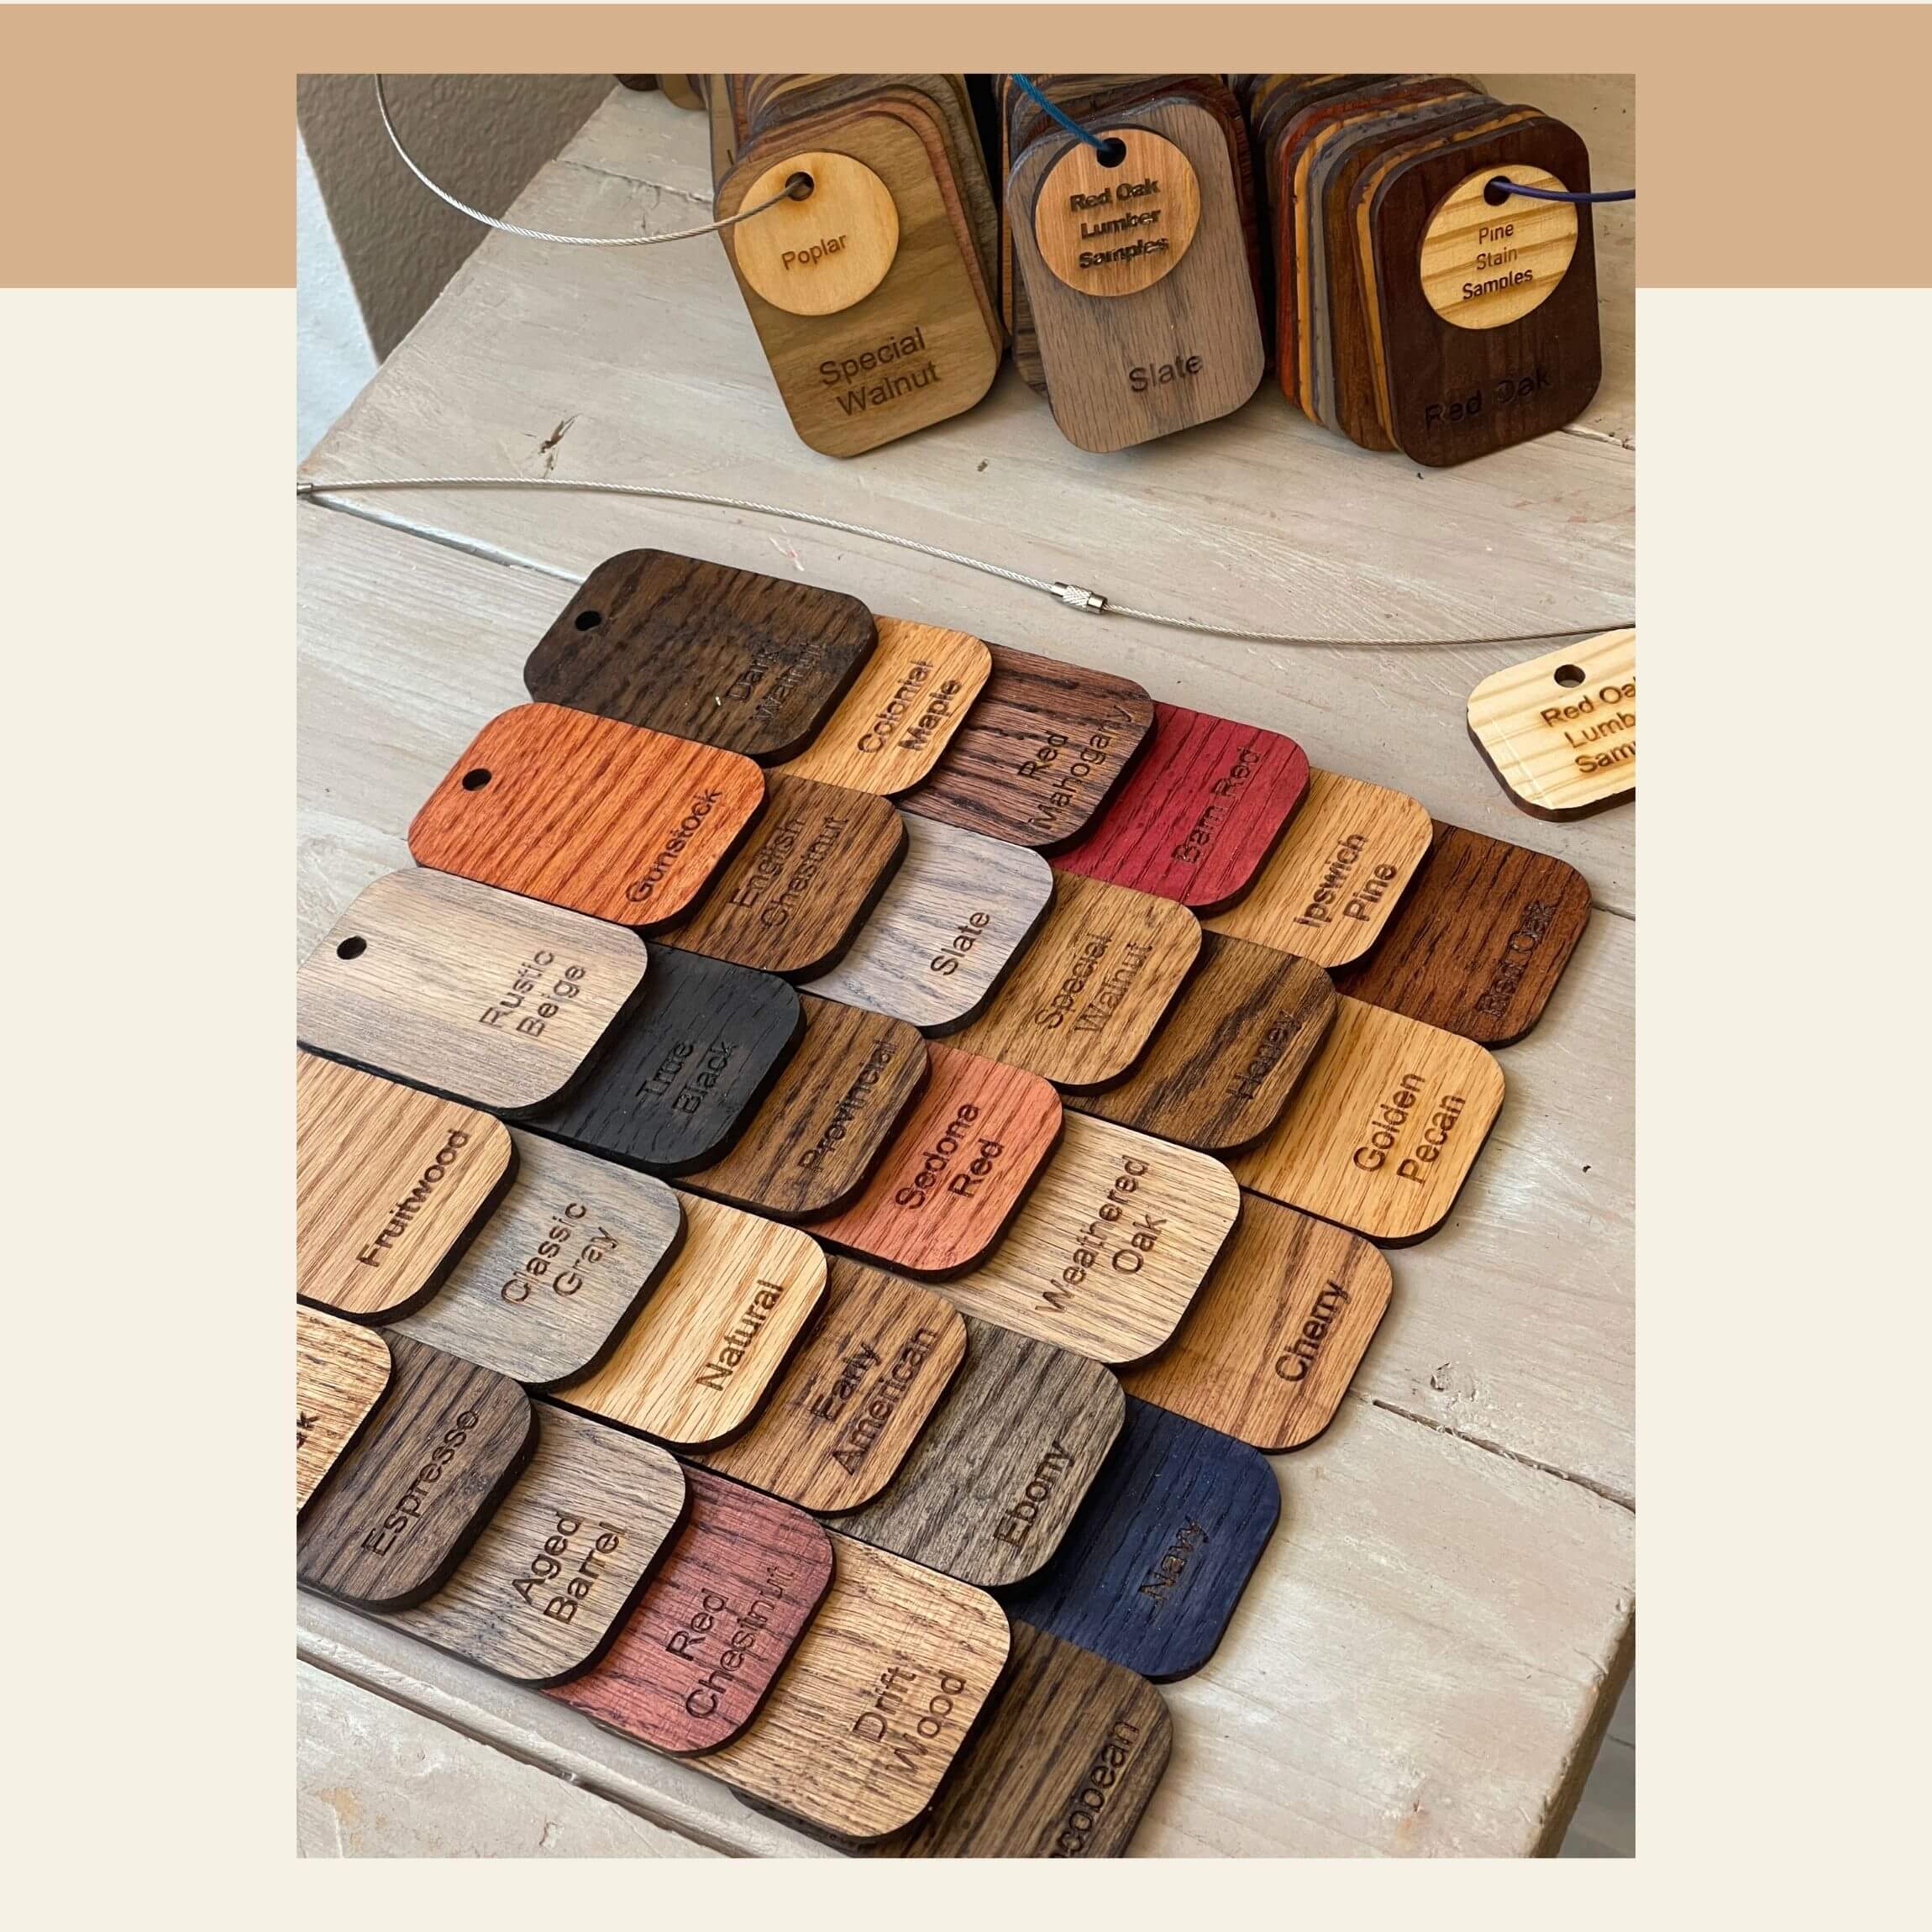 Each of the wood stain samples variety pack comes with thirty colors. 